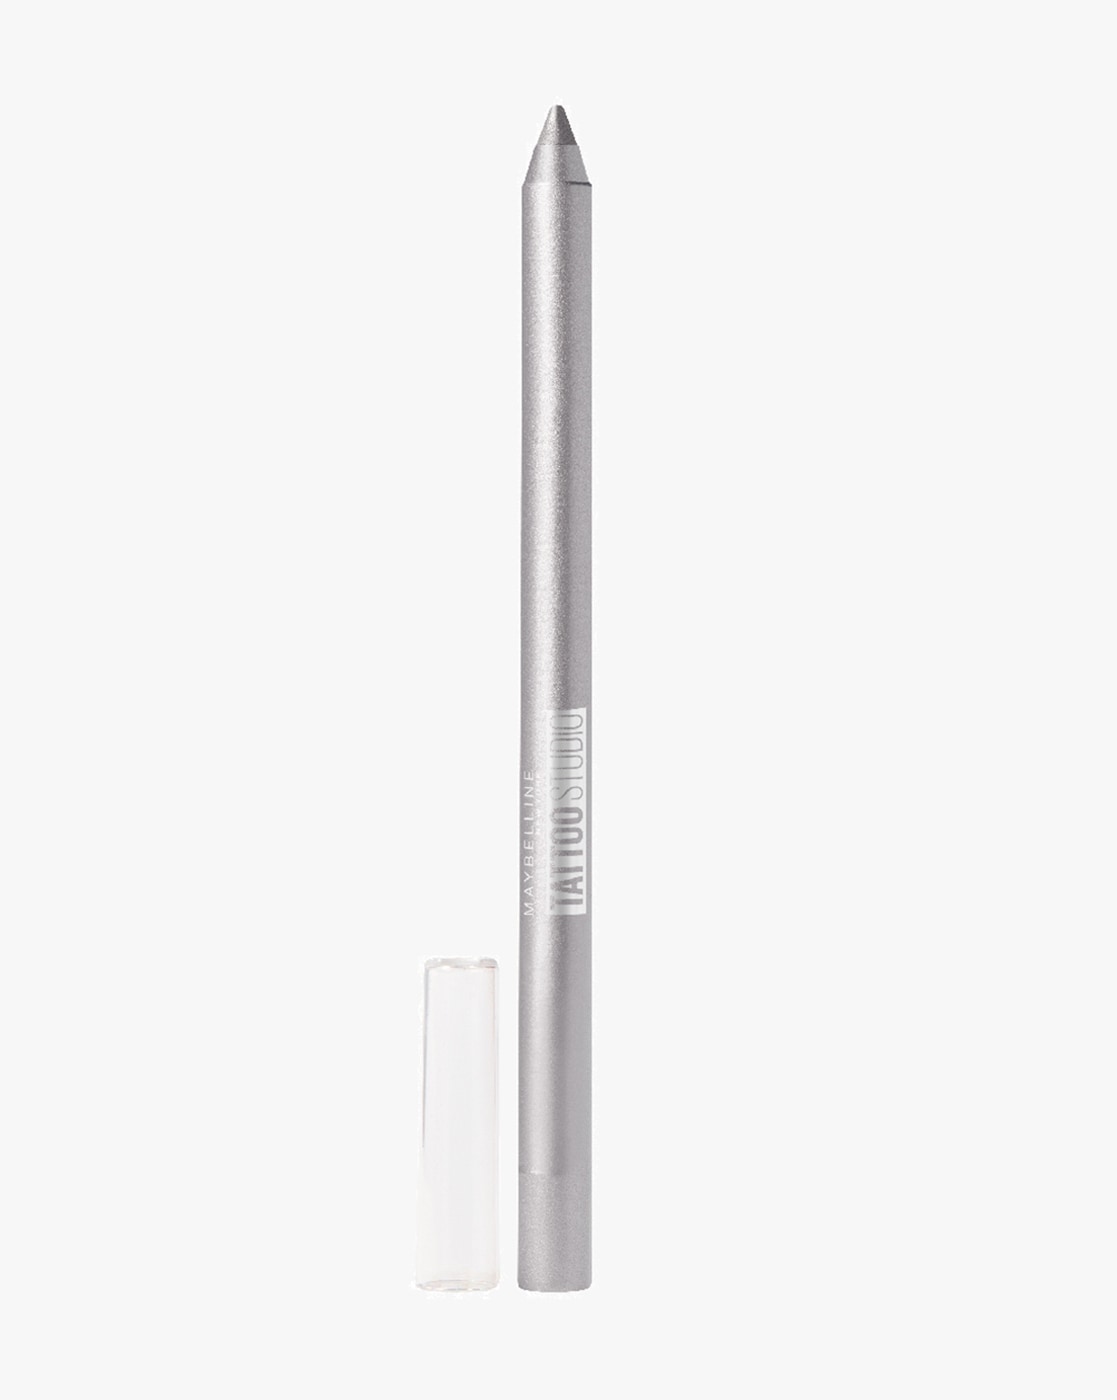 Buy Maybelline New York Tattoo Play White Liquid Eyeliner - Longwear  Waterproof Eyeliner - Matte Finish, Defend, 2.1ml Online at Low Prices in  India - Amazon.in